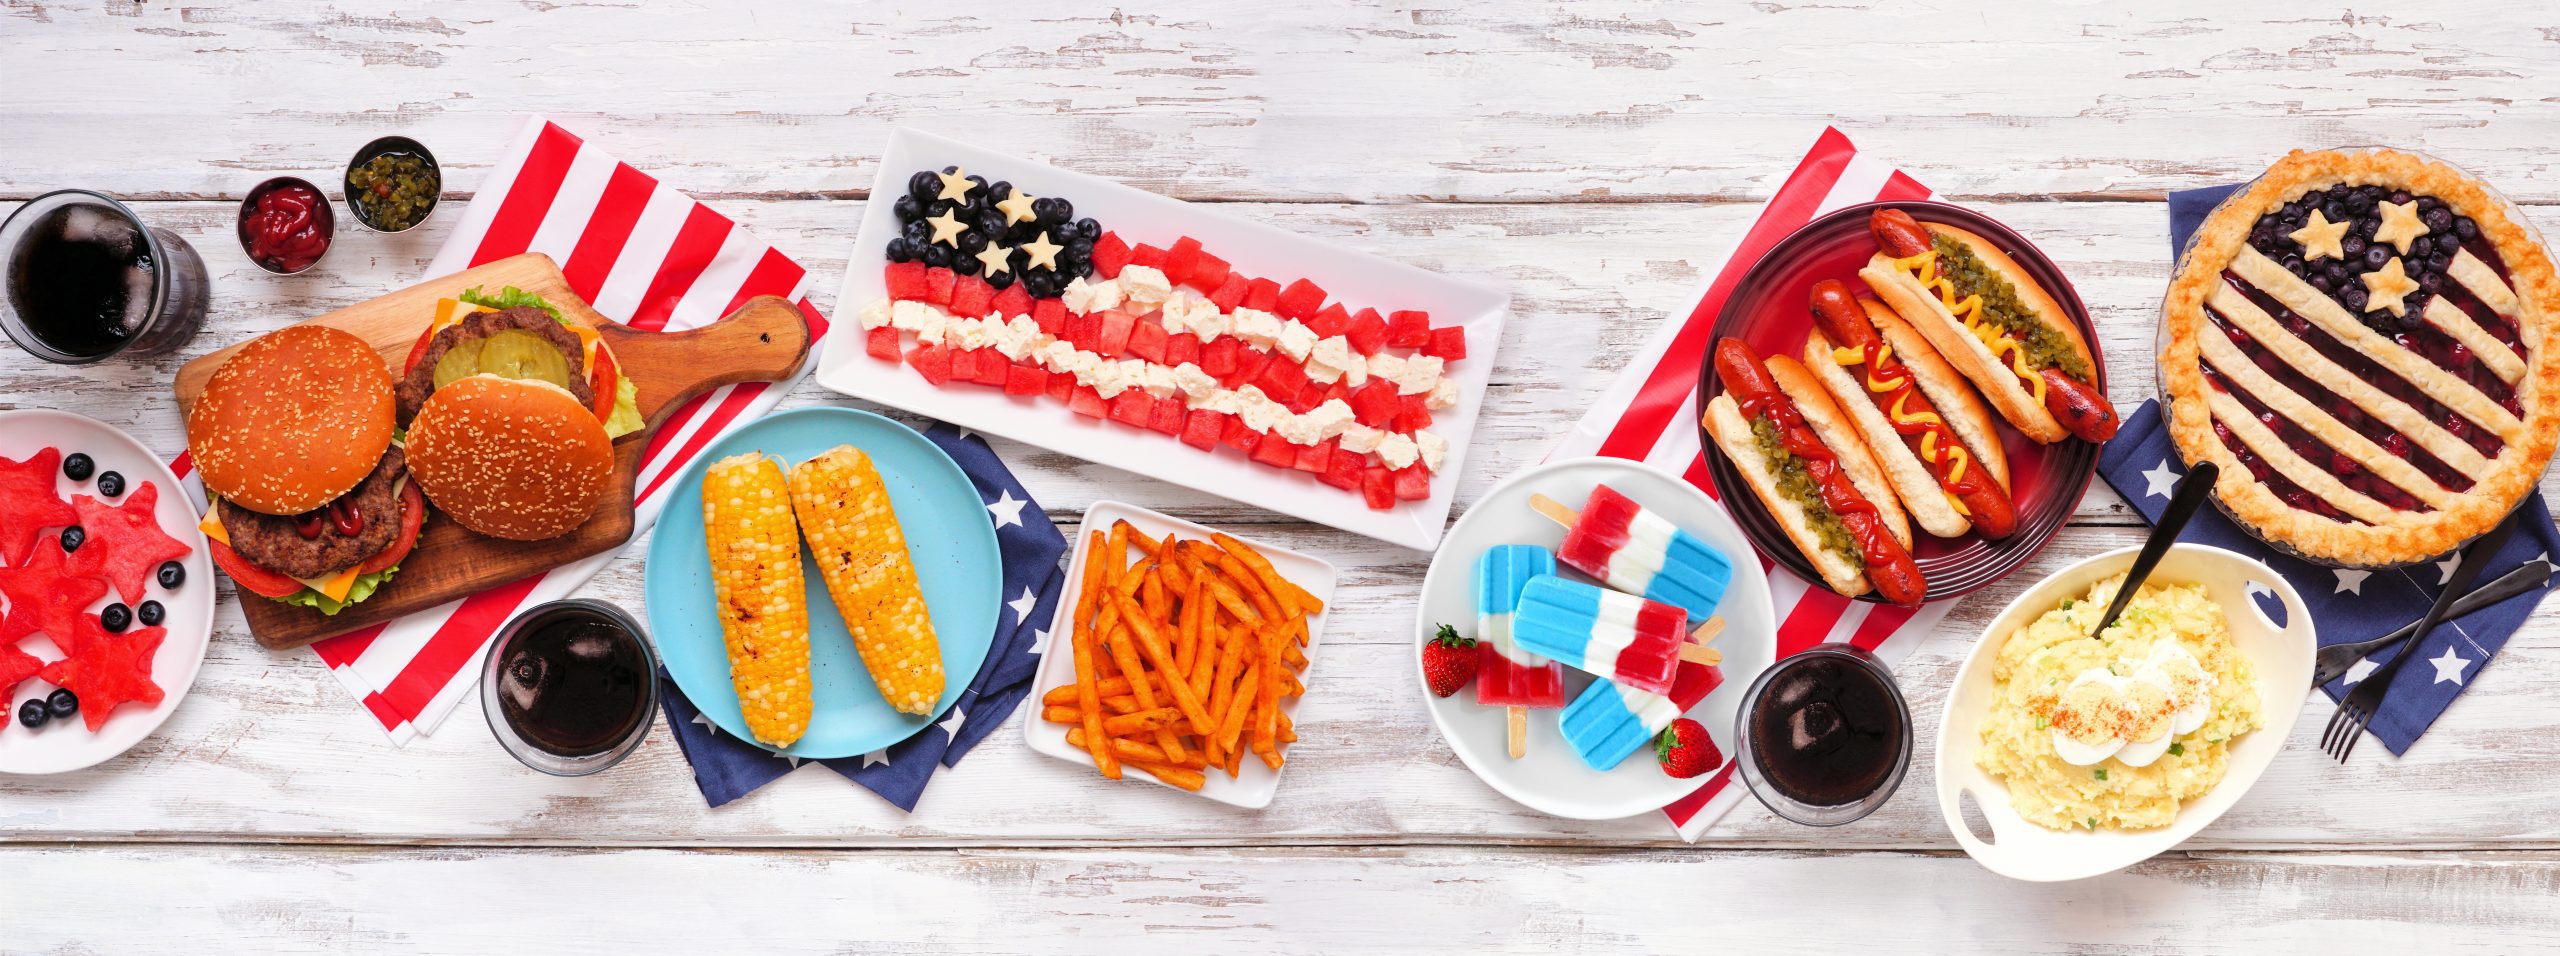 Enjoy outdoor dining with 4th of July recipes